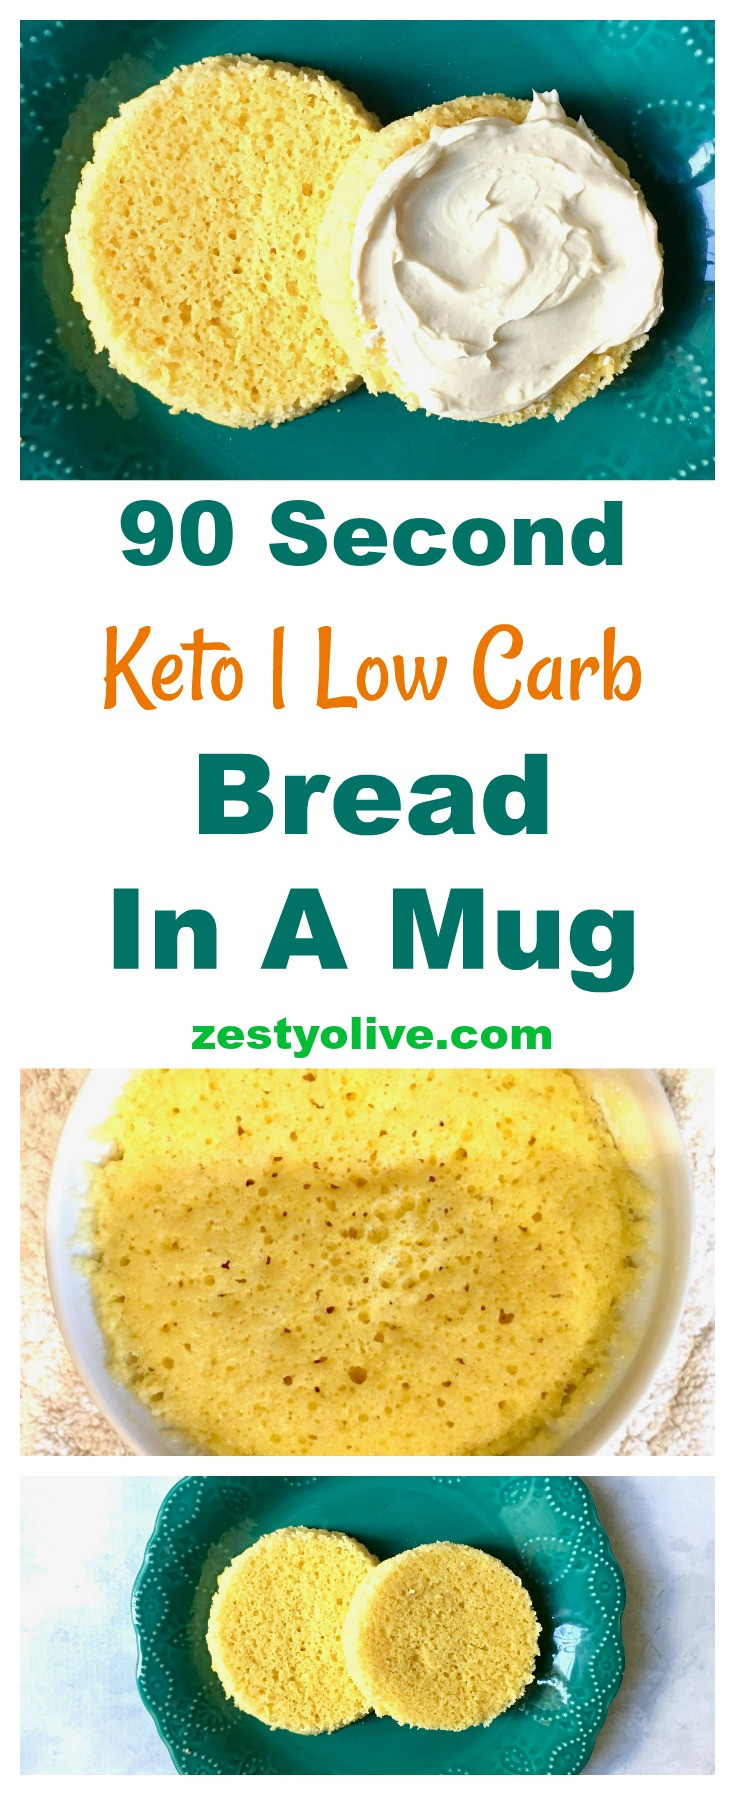 90 Second Keto Bread Recipes
 How To Make 90 Second Keto Low Carb Bread In A Mug Zesty